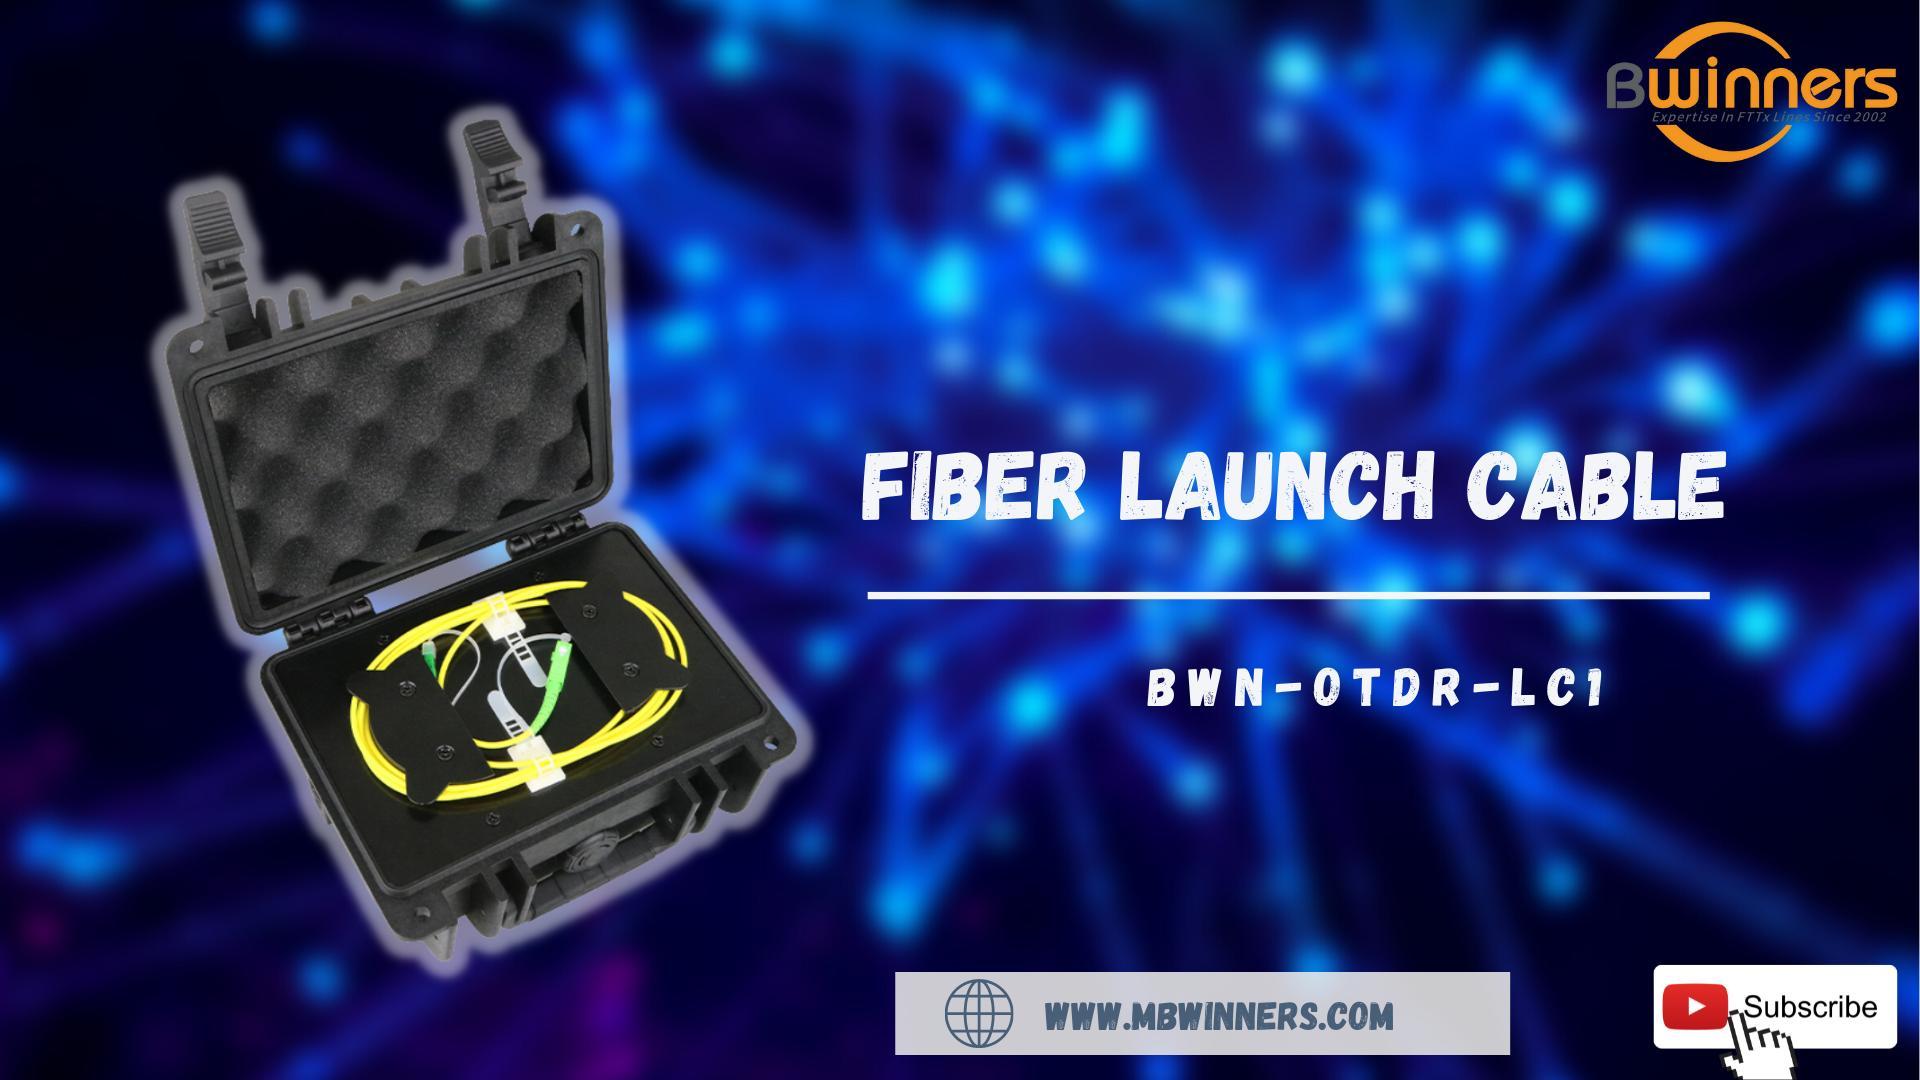 BWN-OTDR-LC1 Fiber Launch Cable